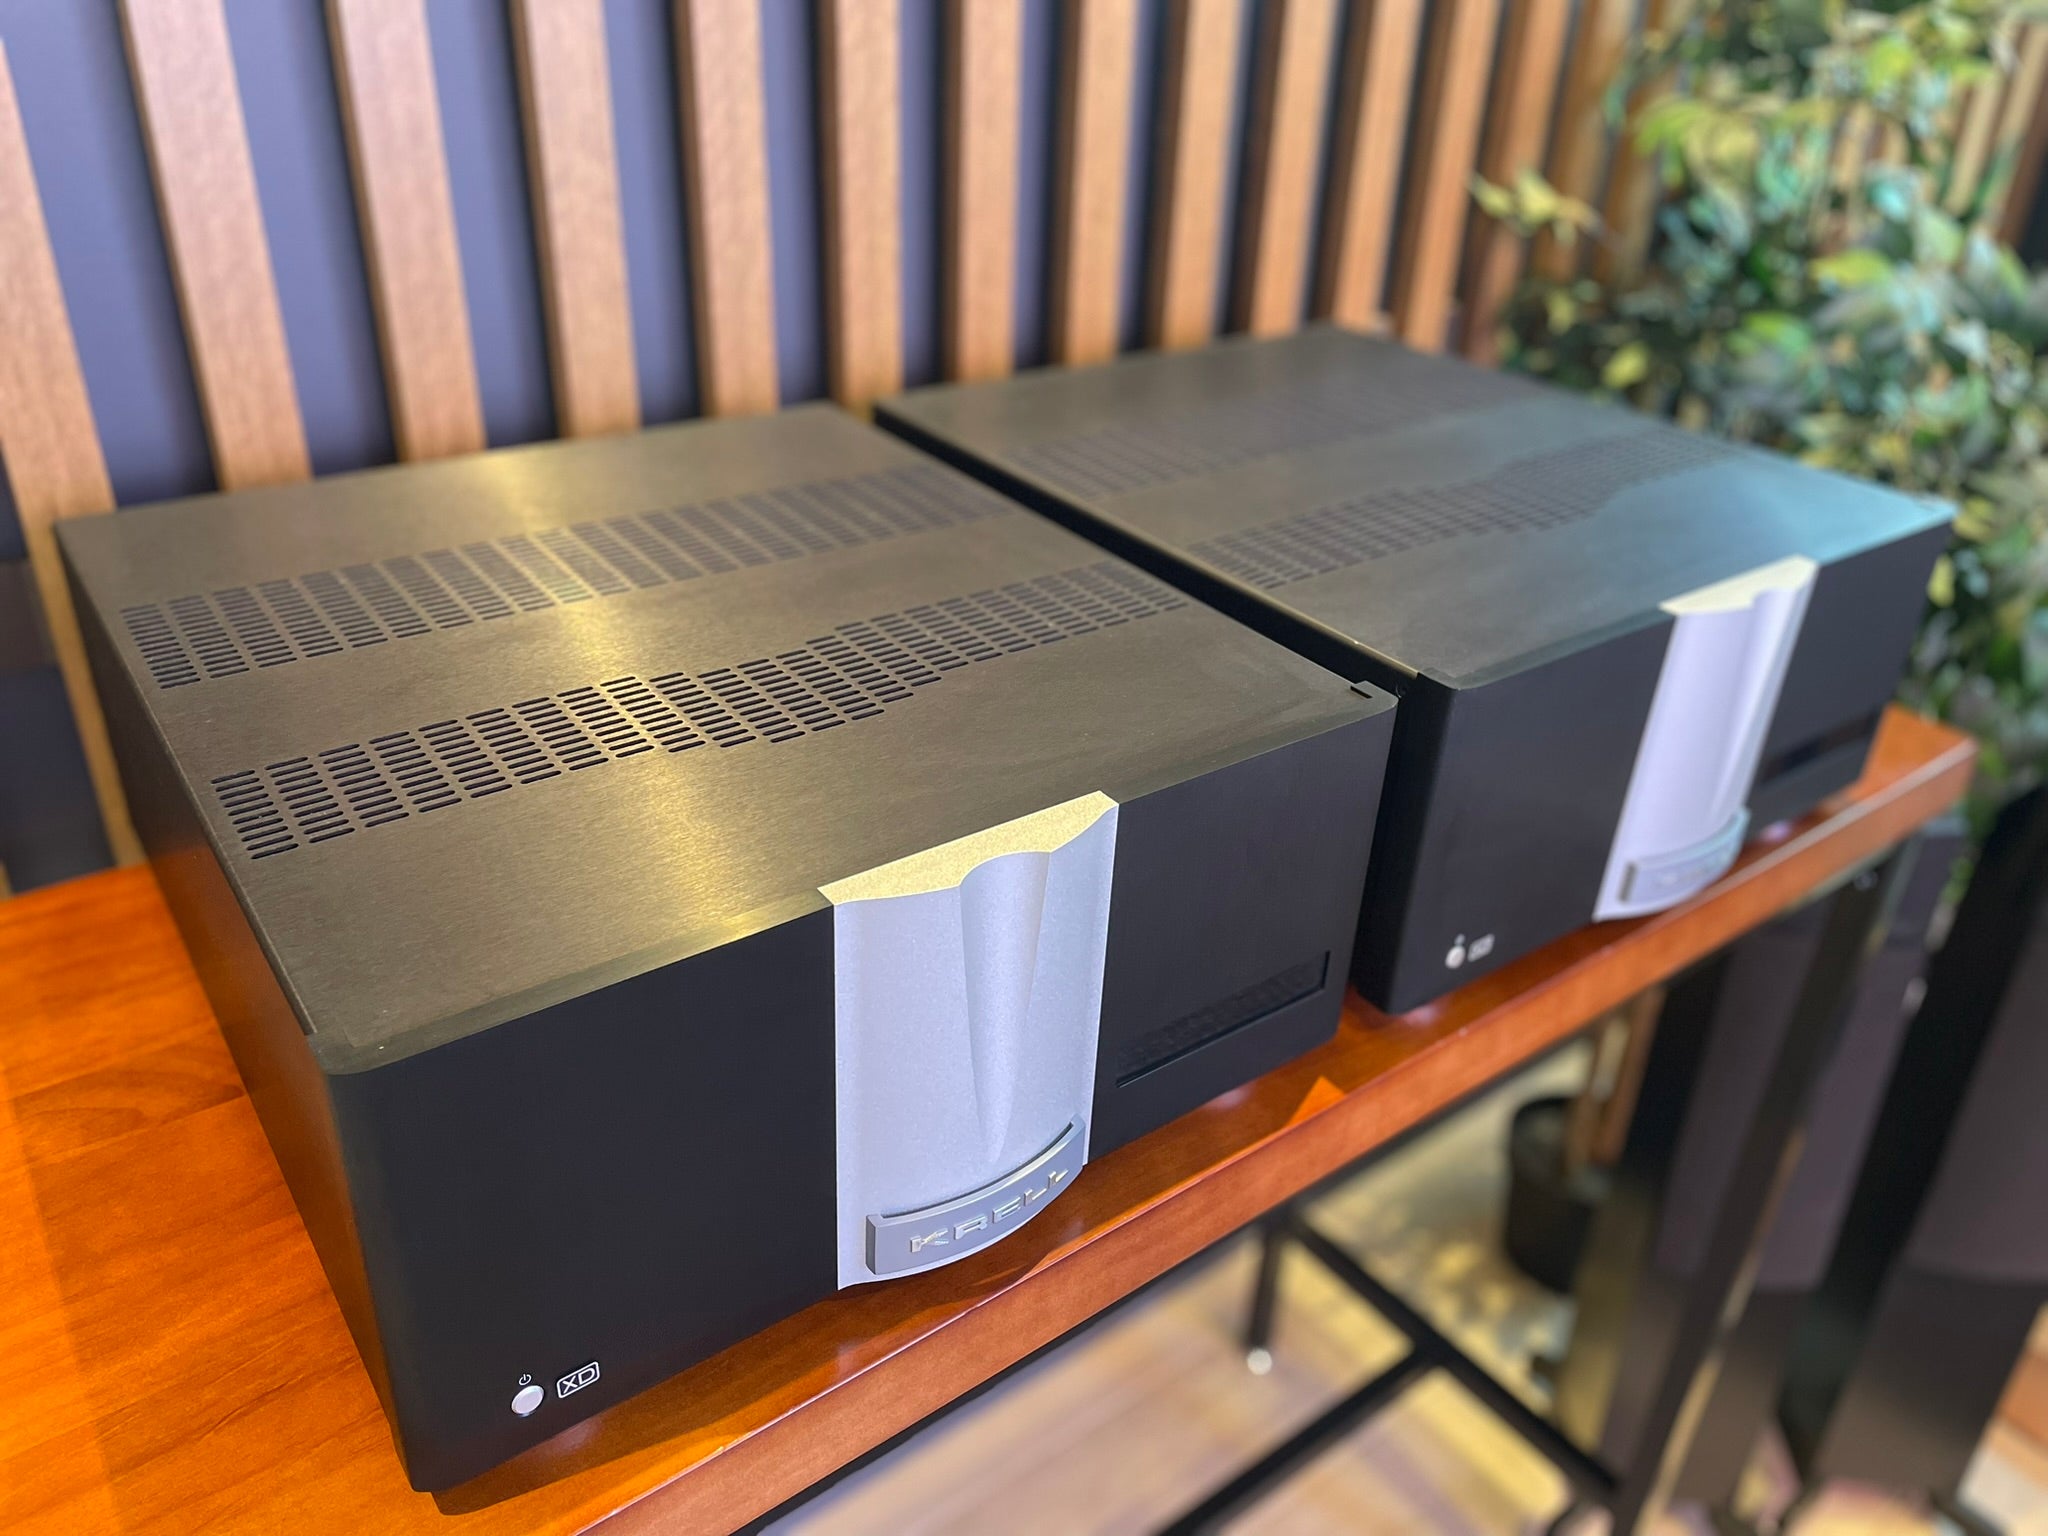 Krell Solo 575 XD Mono Amplifiers Pair - As Traded